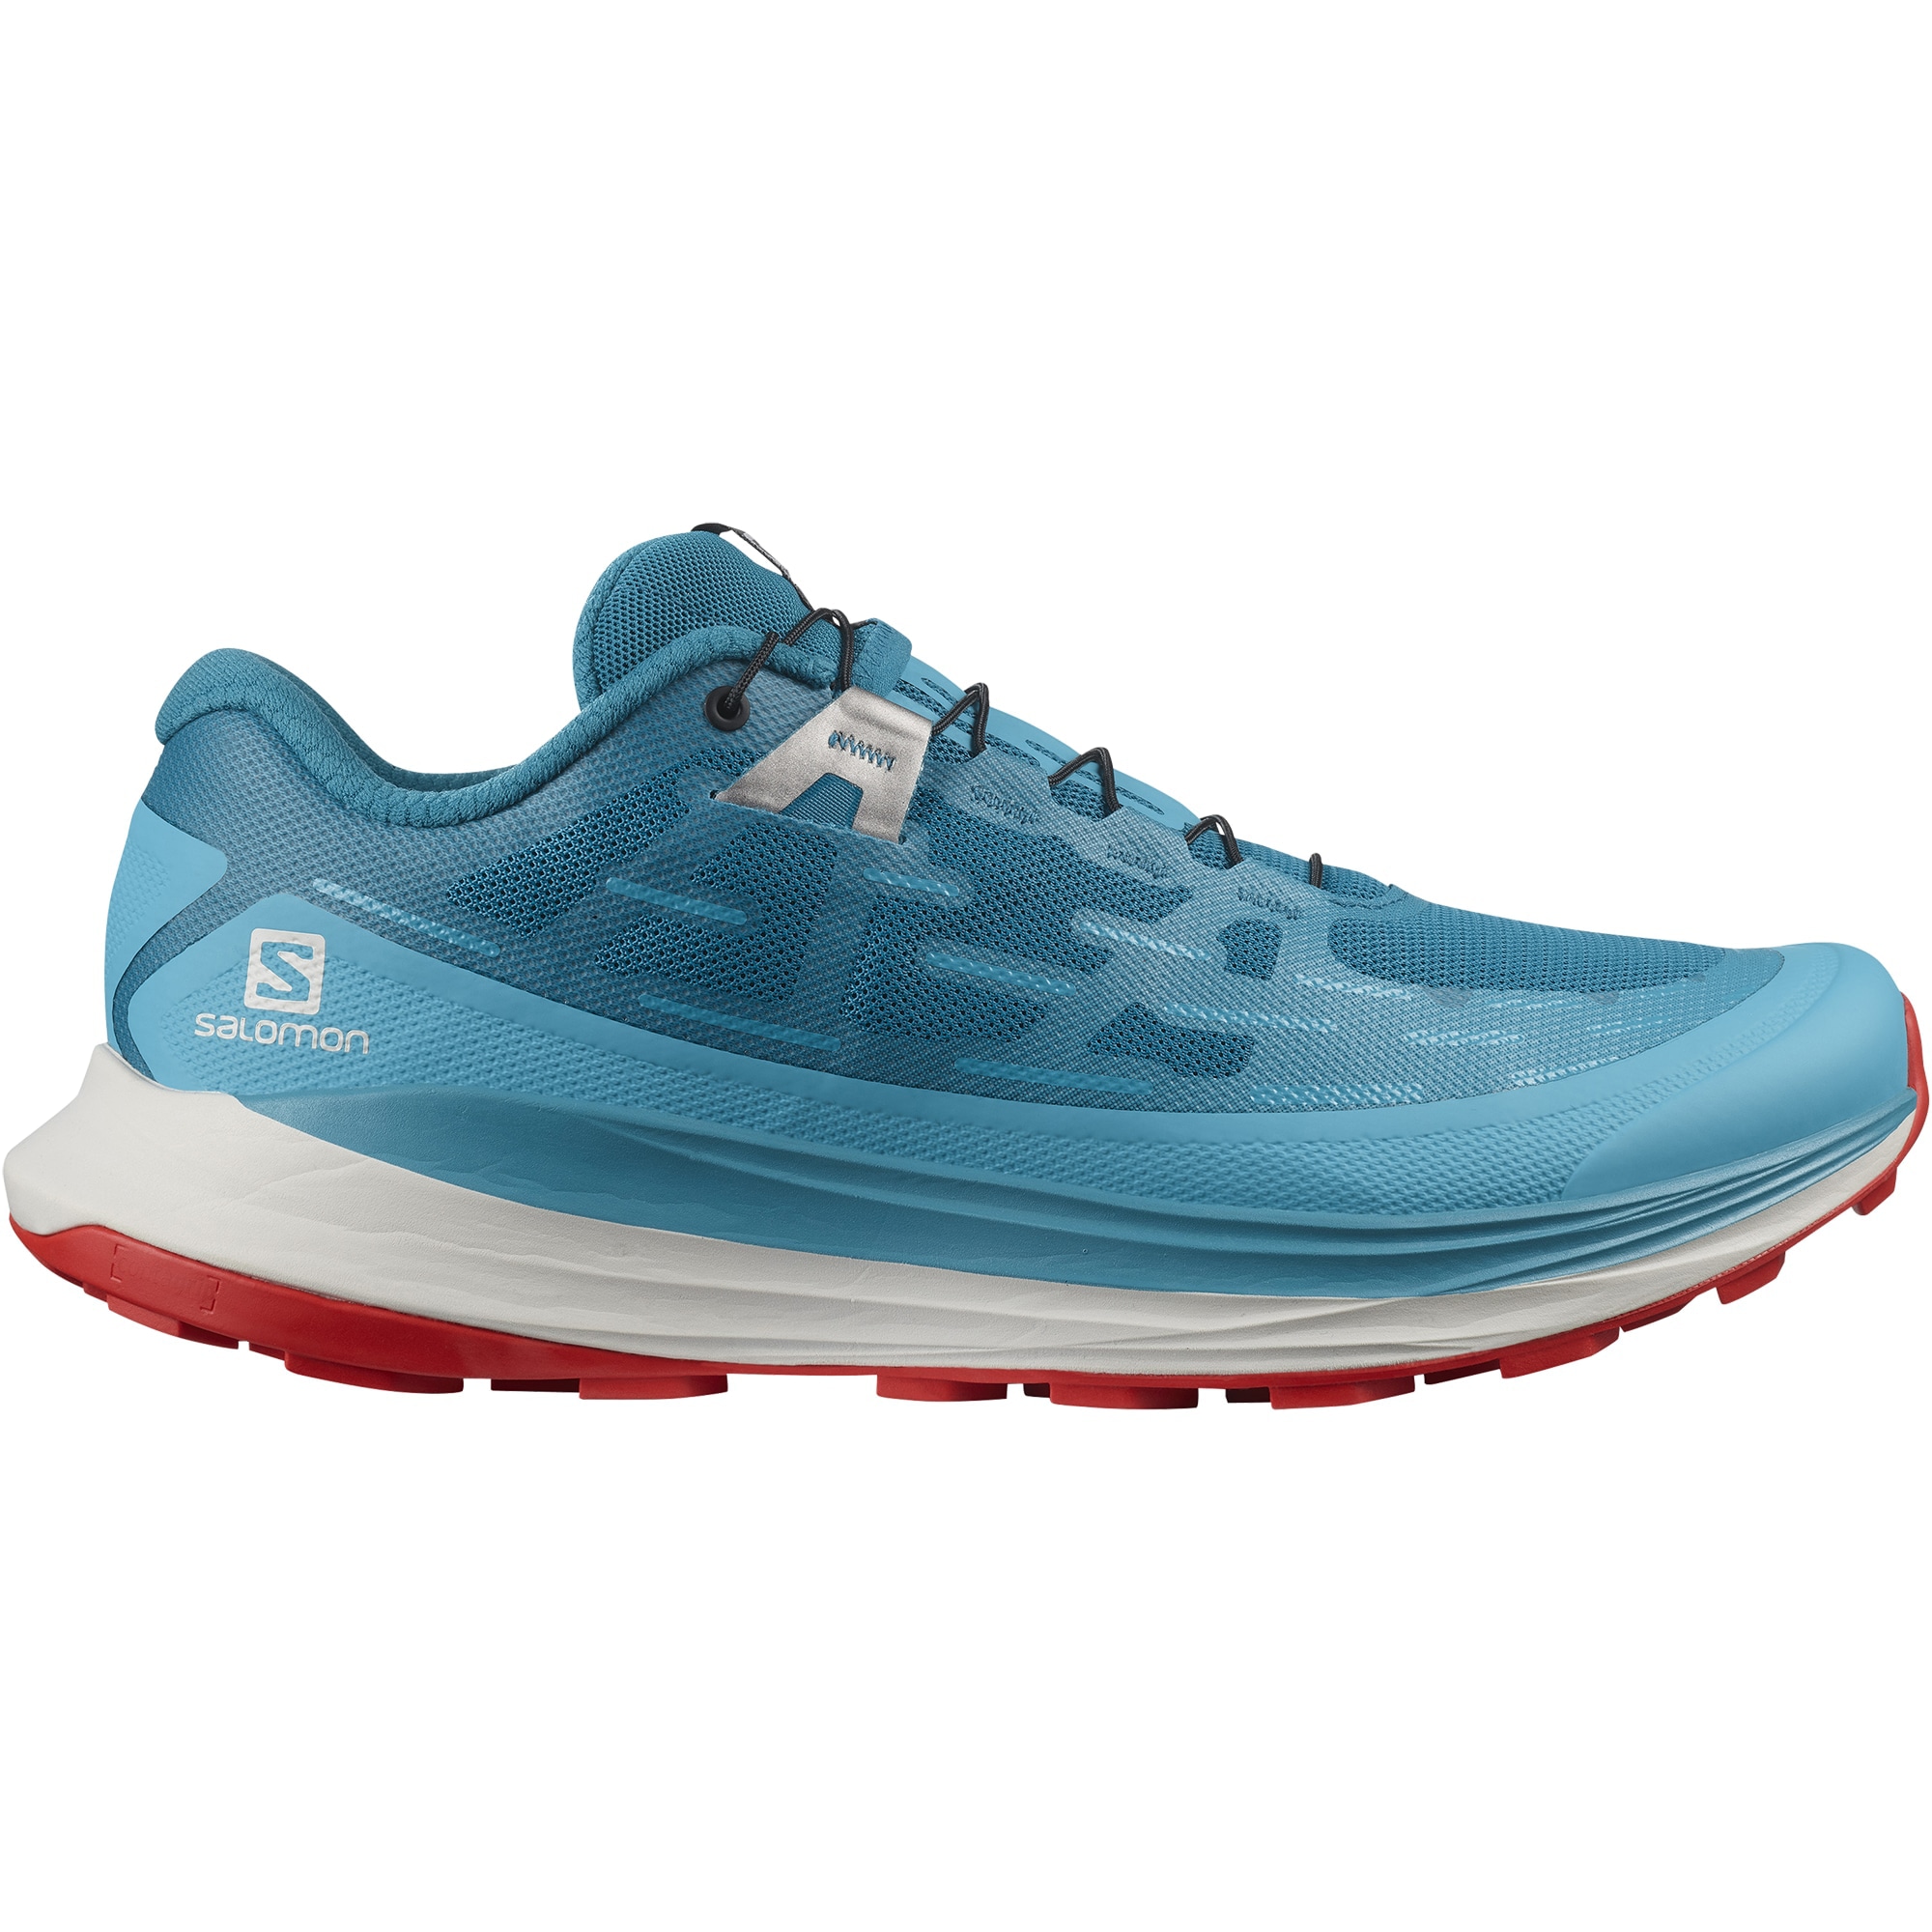 Men's Ultra Glide Trail Running Shoes Crystal Teal / Barrier Reef / Goji Berry